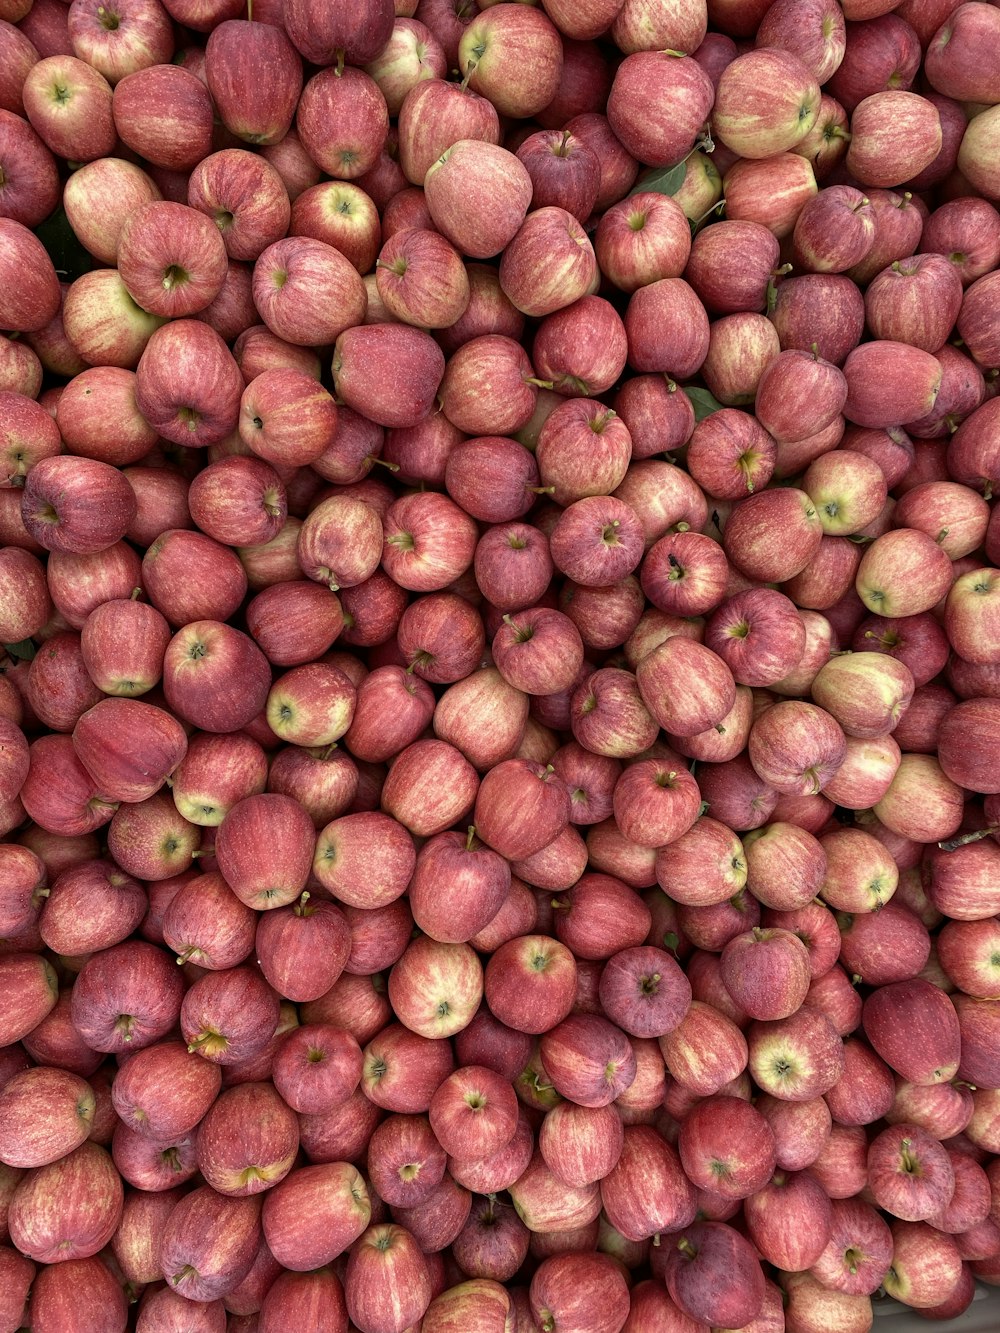 red and brown round fruits